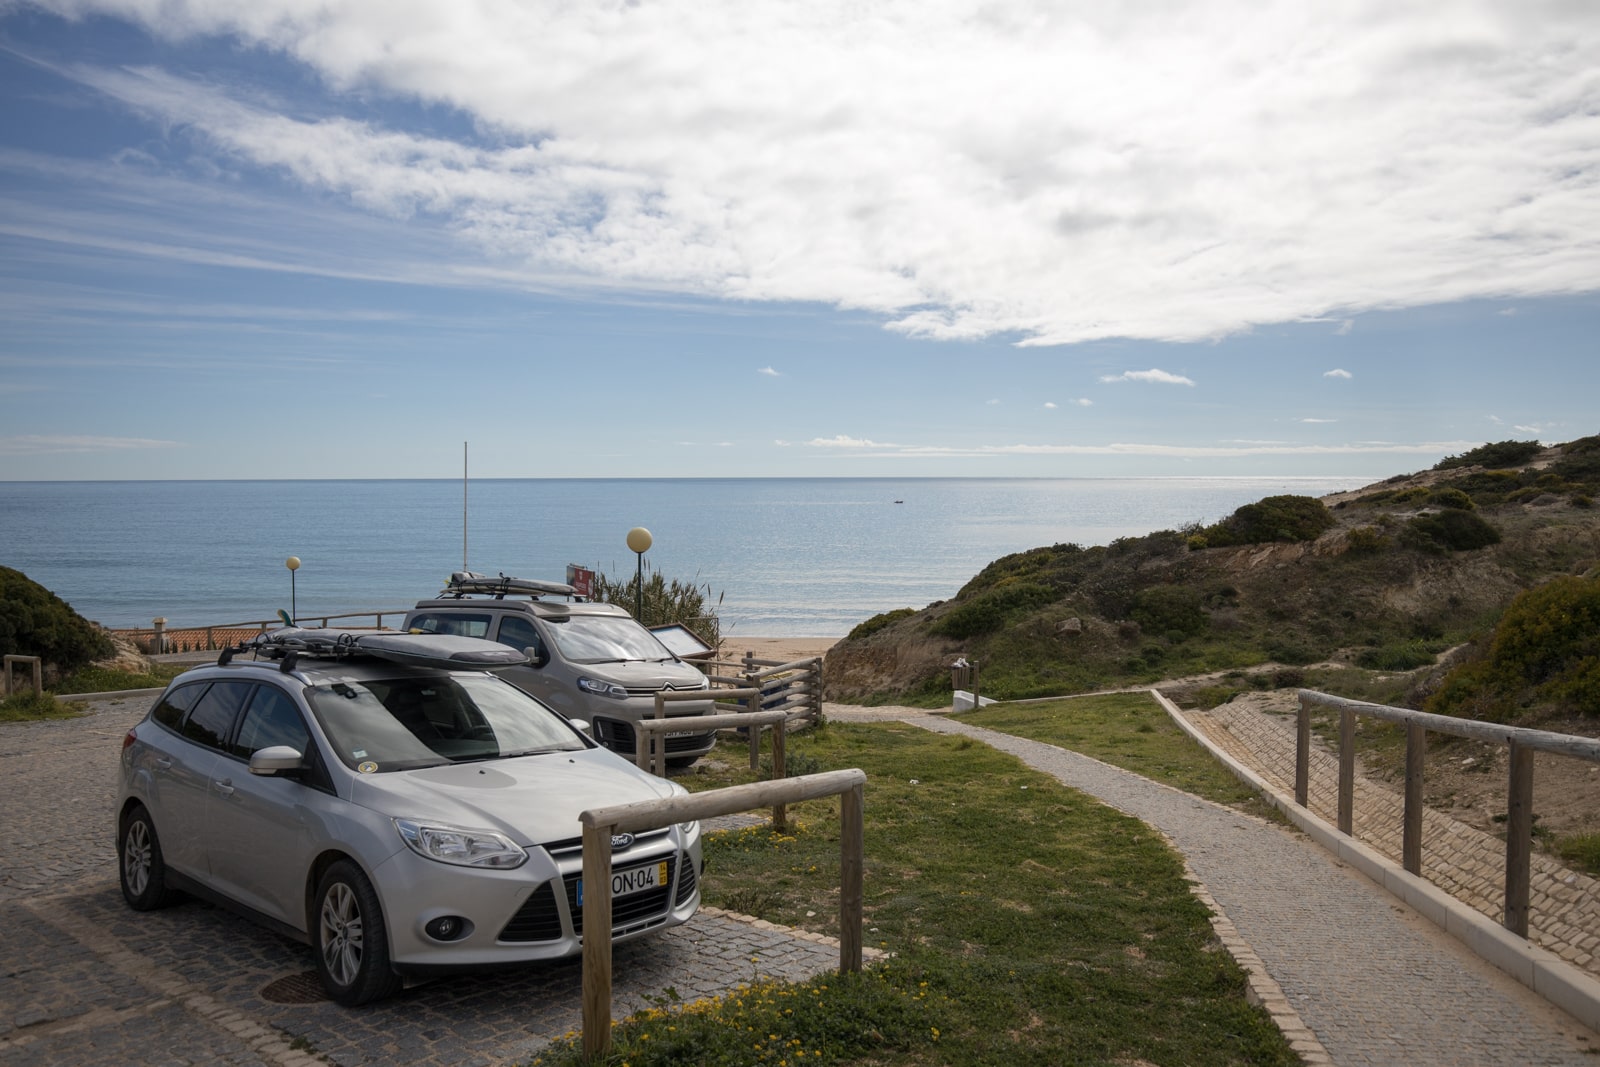 Cars with surfboards in Sagres